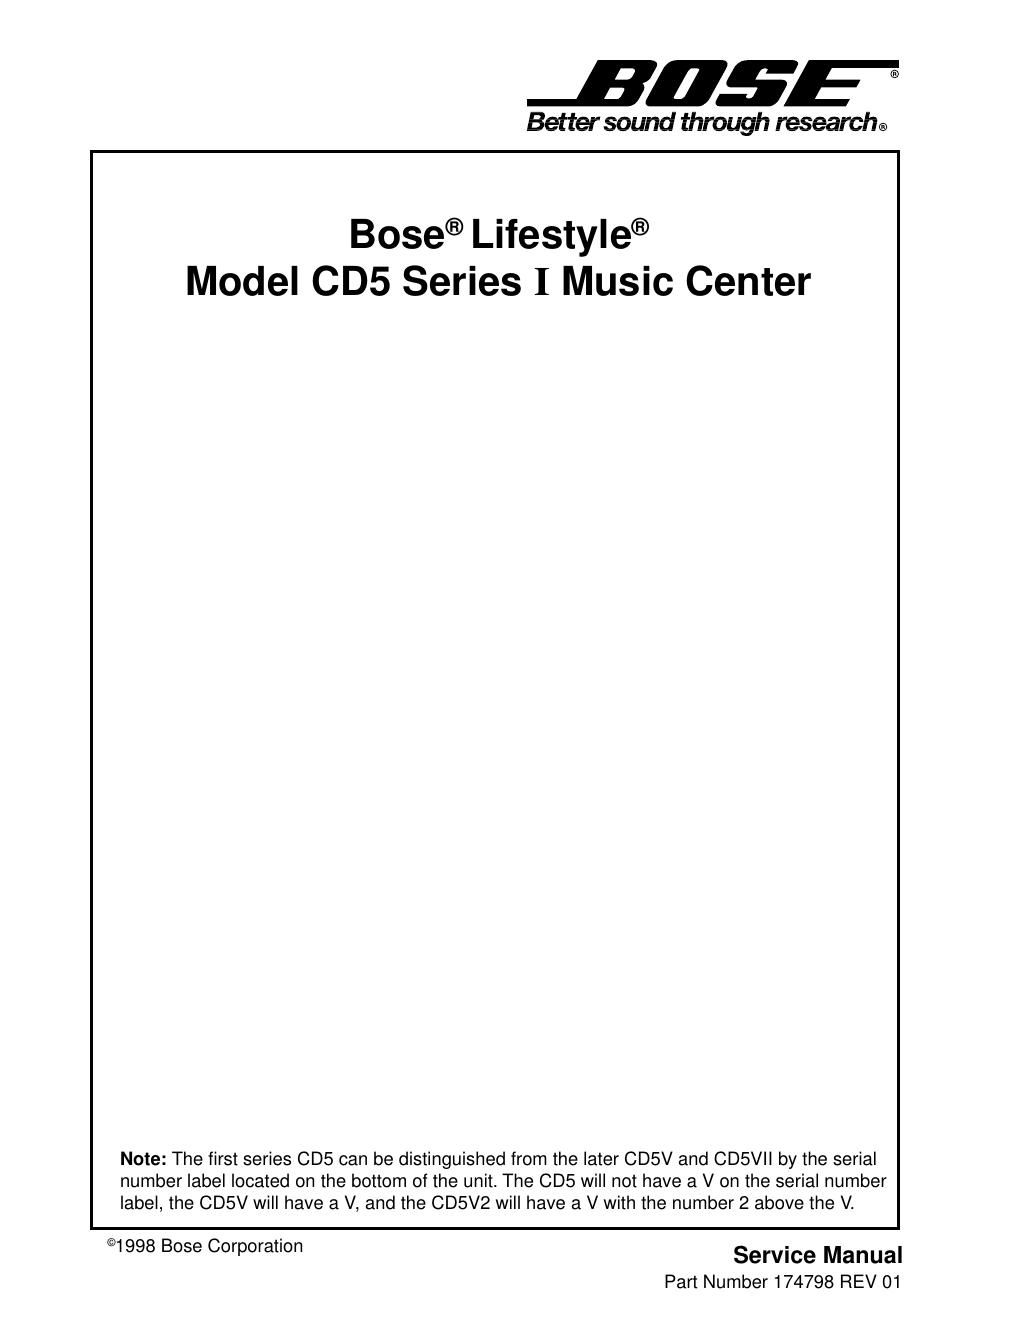 Audio Service - download bose lifestyle cd5 service manual